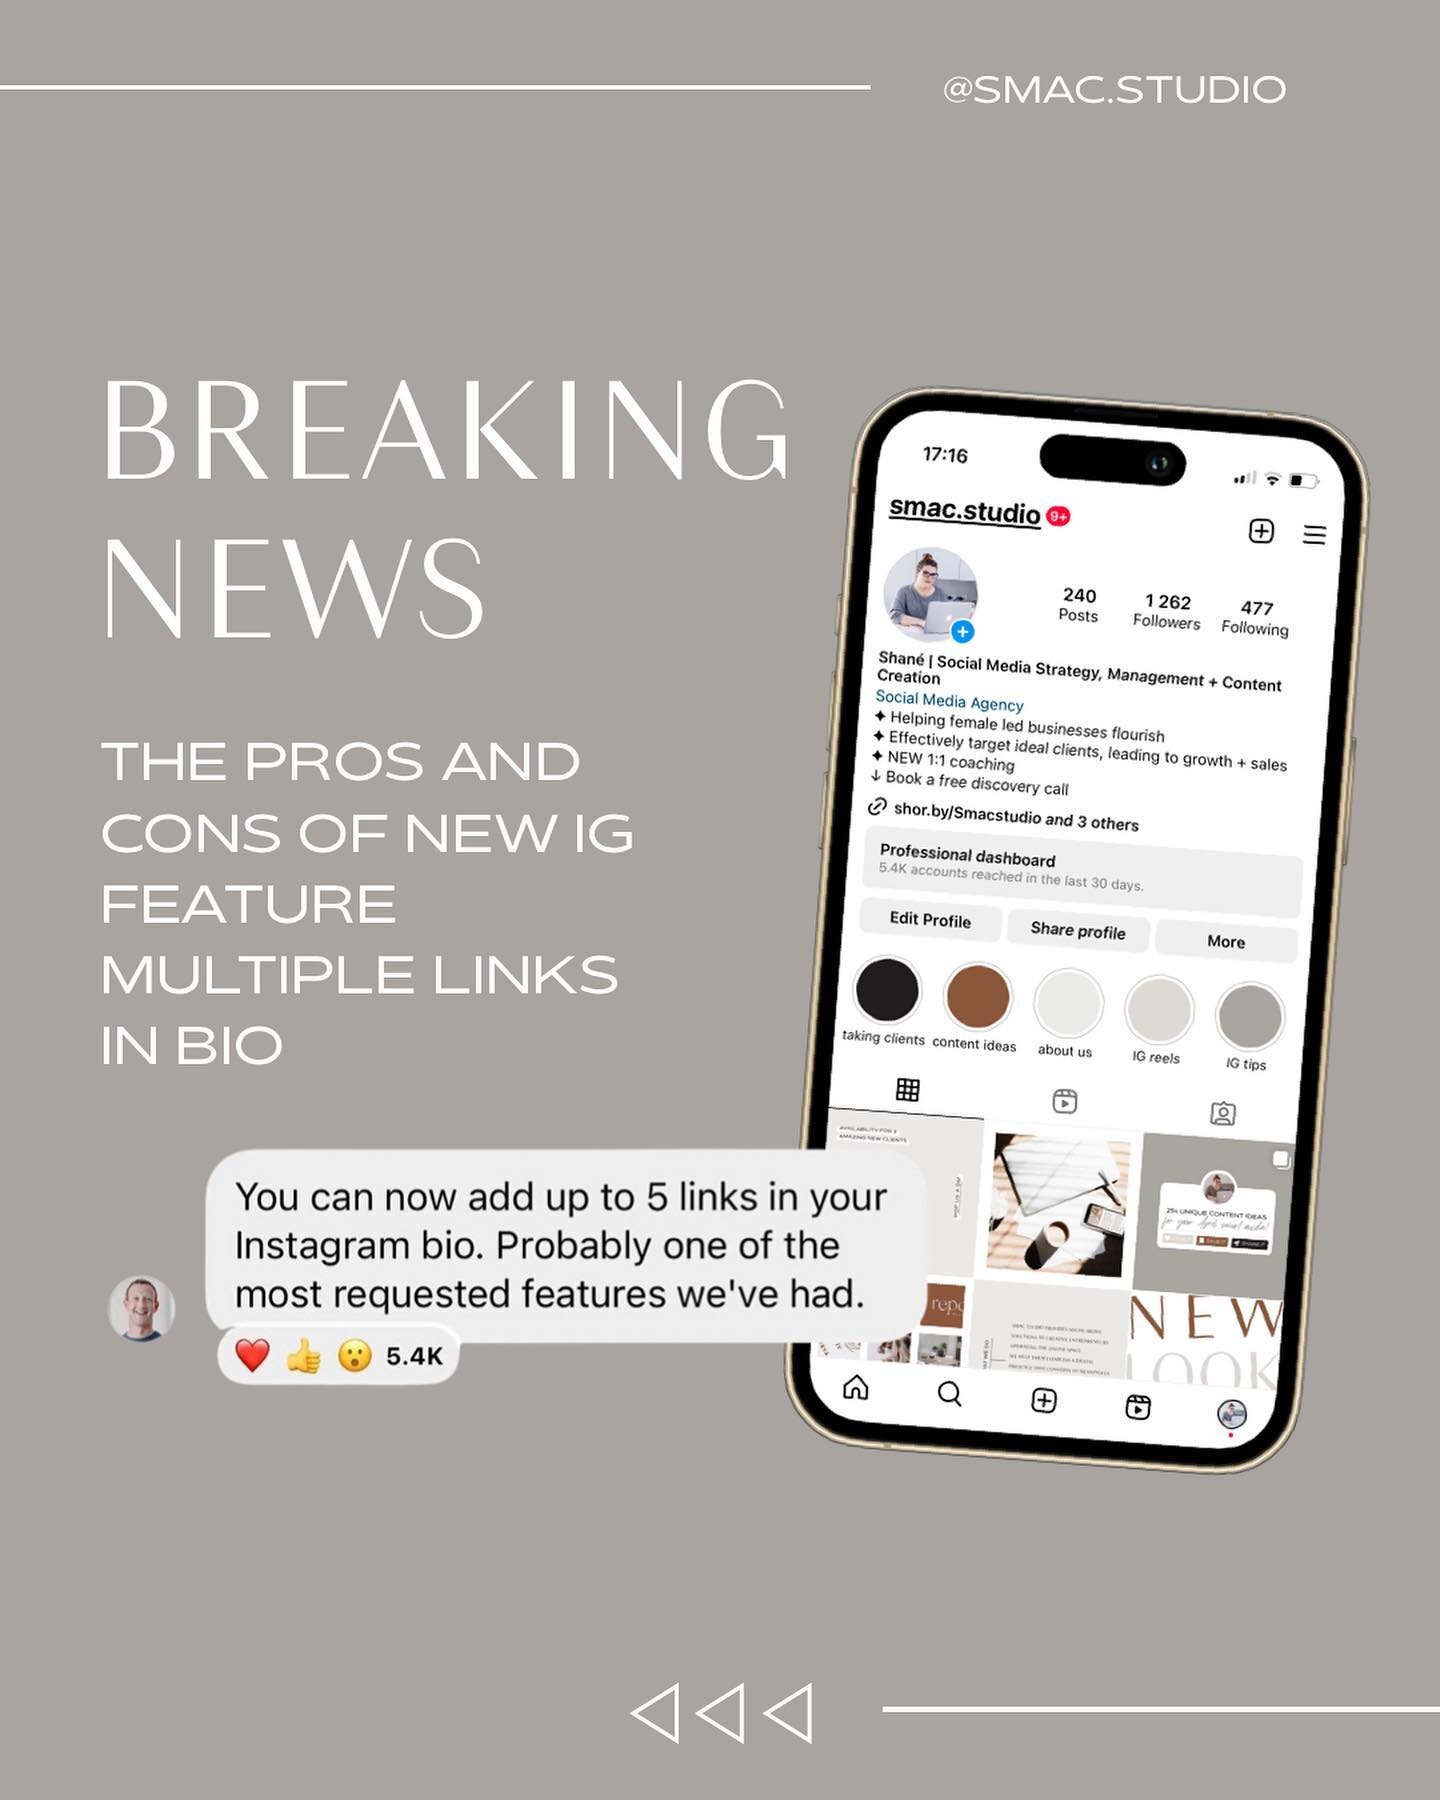 HOT TAKE🔥: We&rsquo;re going to pass on using this new feature, scroll through to see why.📲

We still wish they would allow a link for each individual post / reel as that would be hugely helpful! But we understand that they want people to stay on I